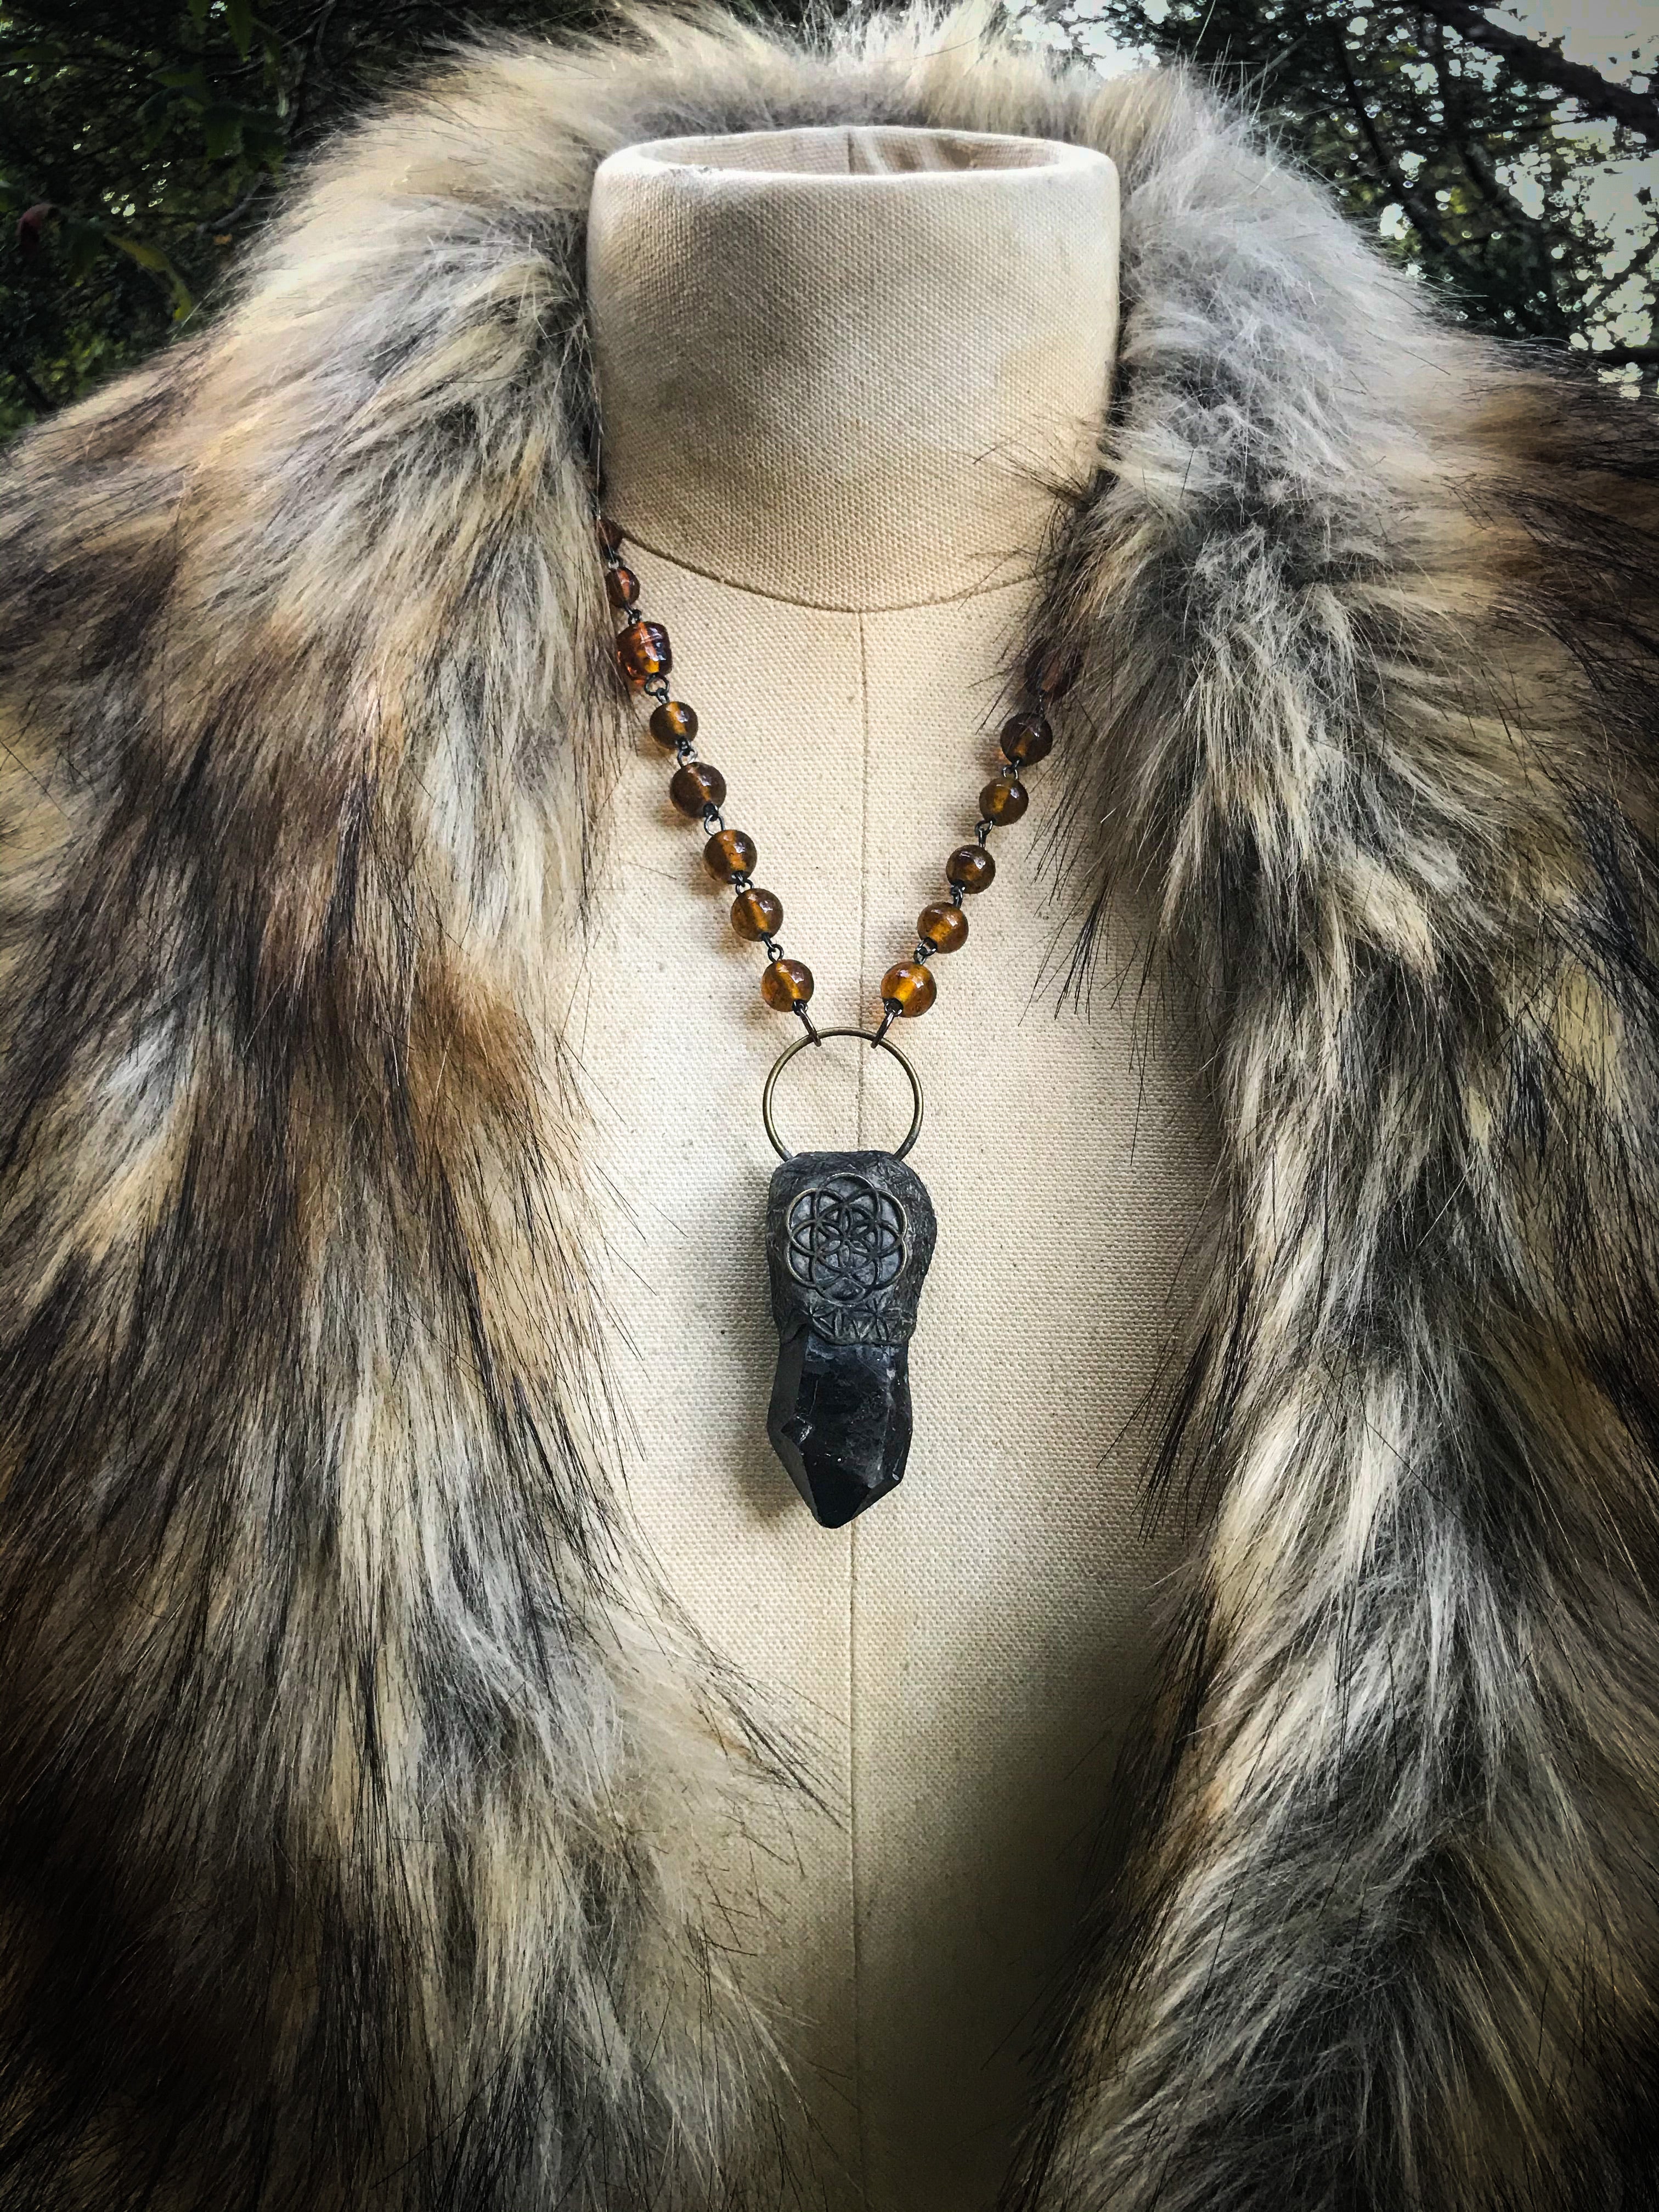 Seed of Life Necklace with Smoky Quartz for Cosmic Consciousness